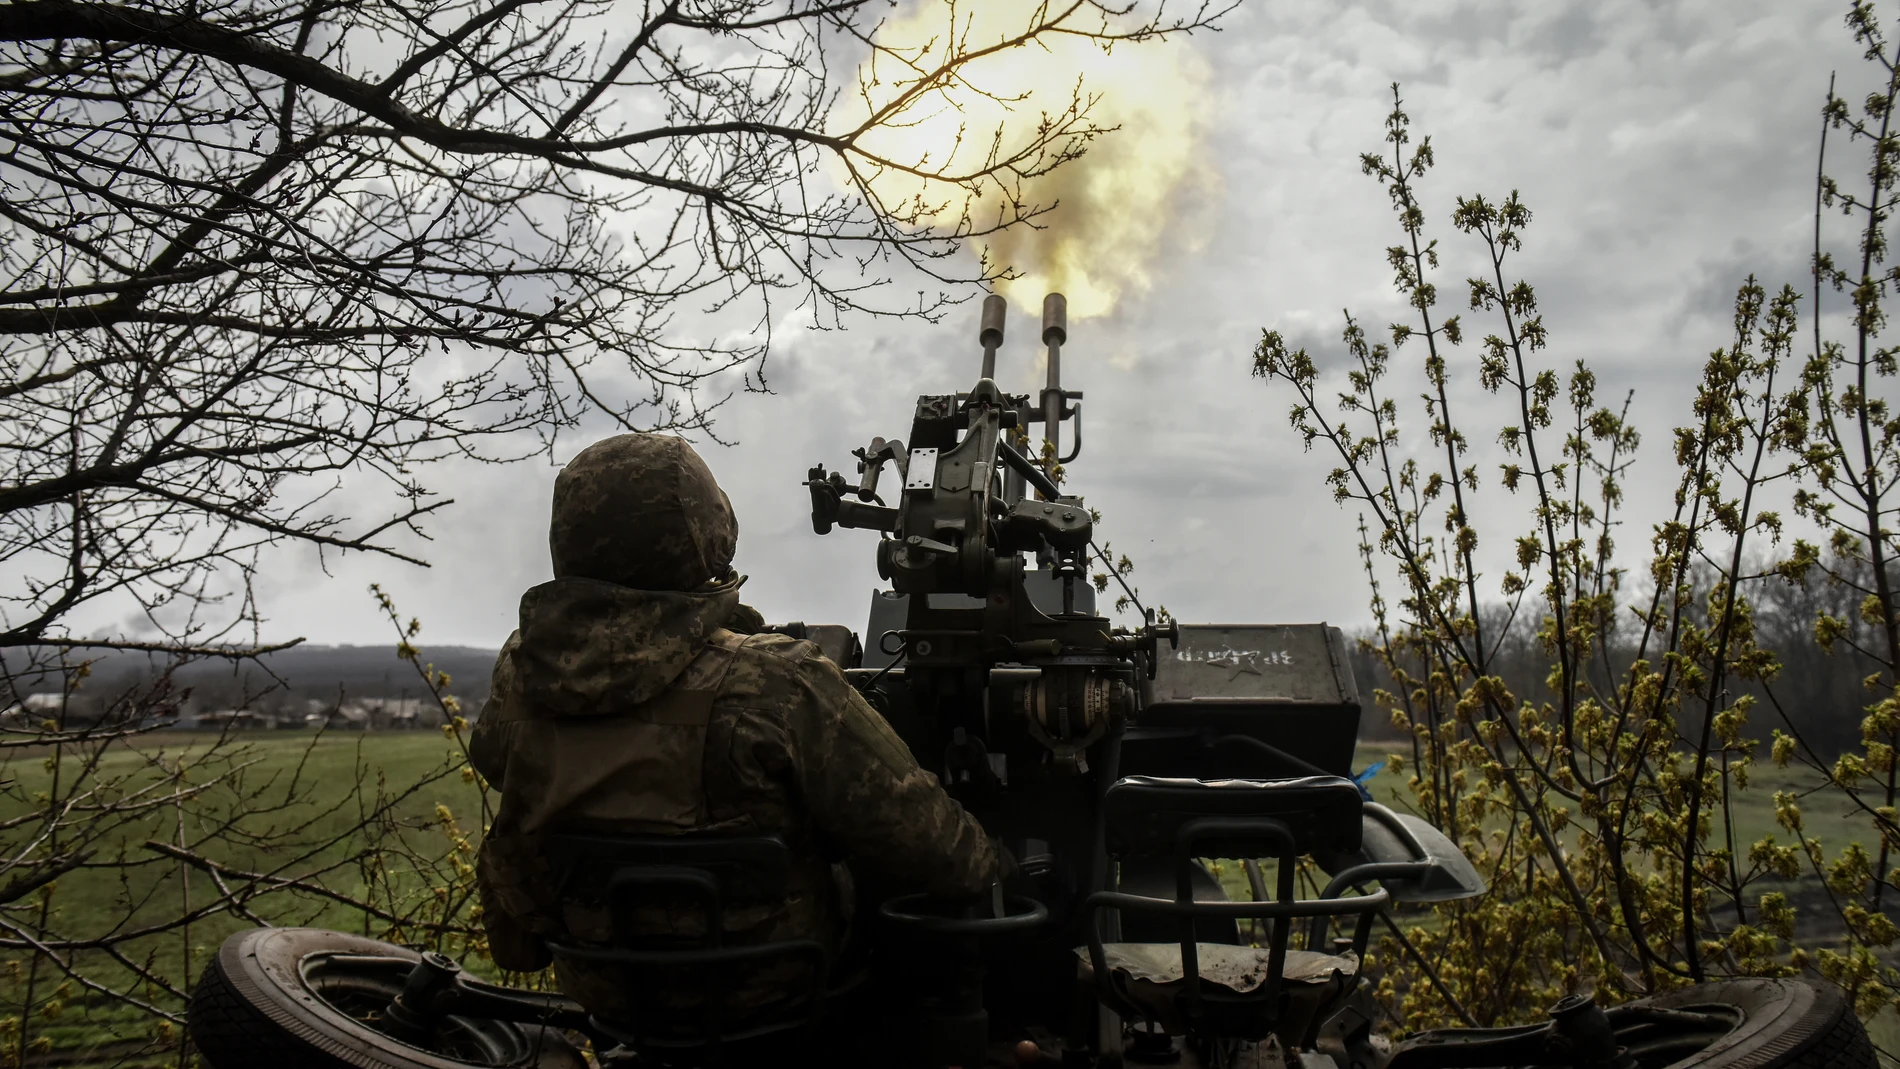 Bakhmut (Ukraine), 07/04/2023.- An Ukrainian serviceman of 57th Otaman Kost Hordiienko Separate Motorized Infantry Brigade fires 2s1 "Gvozdyka" self-propelled howitzers at an undisclosed position near the outskirts of Bakhmut, Donetsk region, Ukraine, 07 April 2023. Russian troops entered Ukrainian territory on 24 February 2022, starting a conflict that has provoked destruction and a humanitarian crisis. (Incendio, Rusia, Ucrania) EFE/EPA/OLEG PETRASYUK 